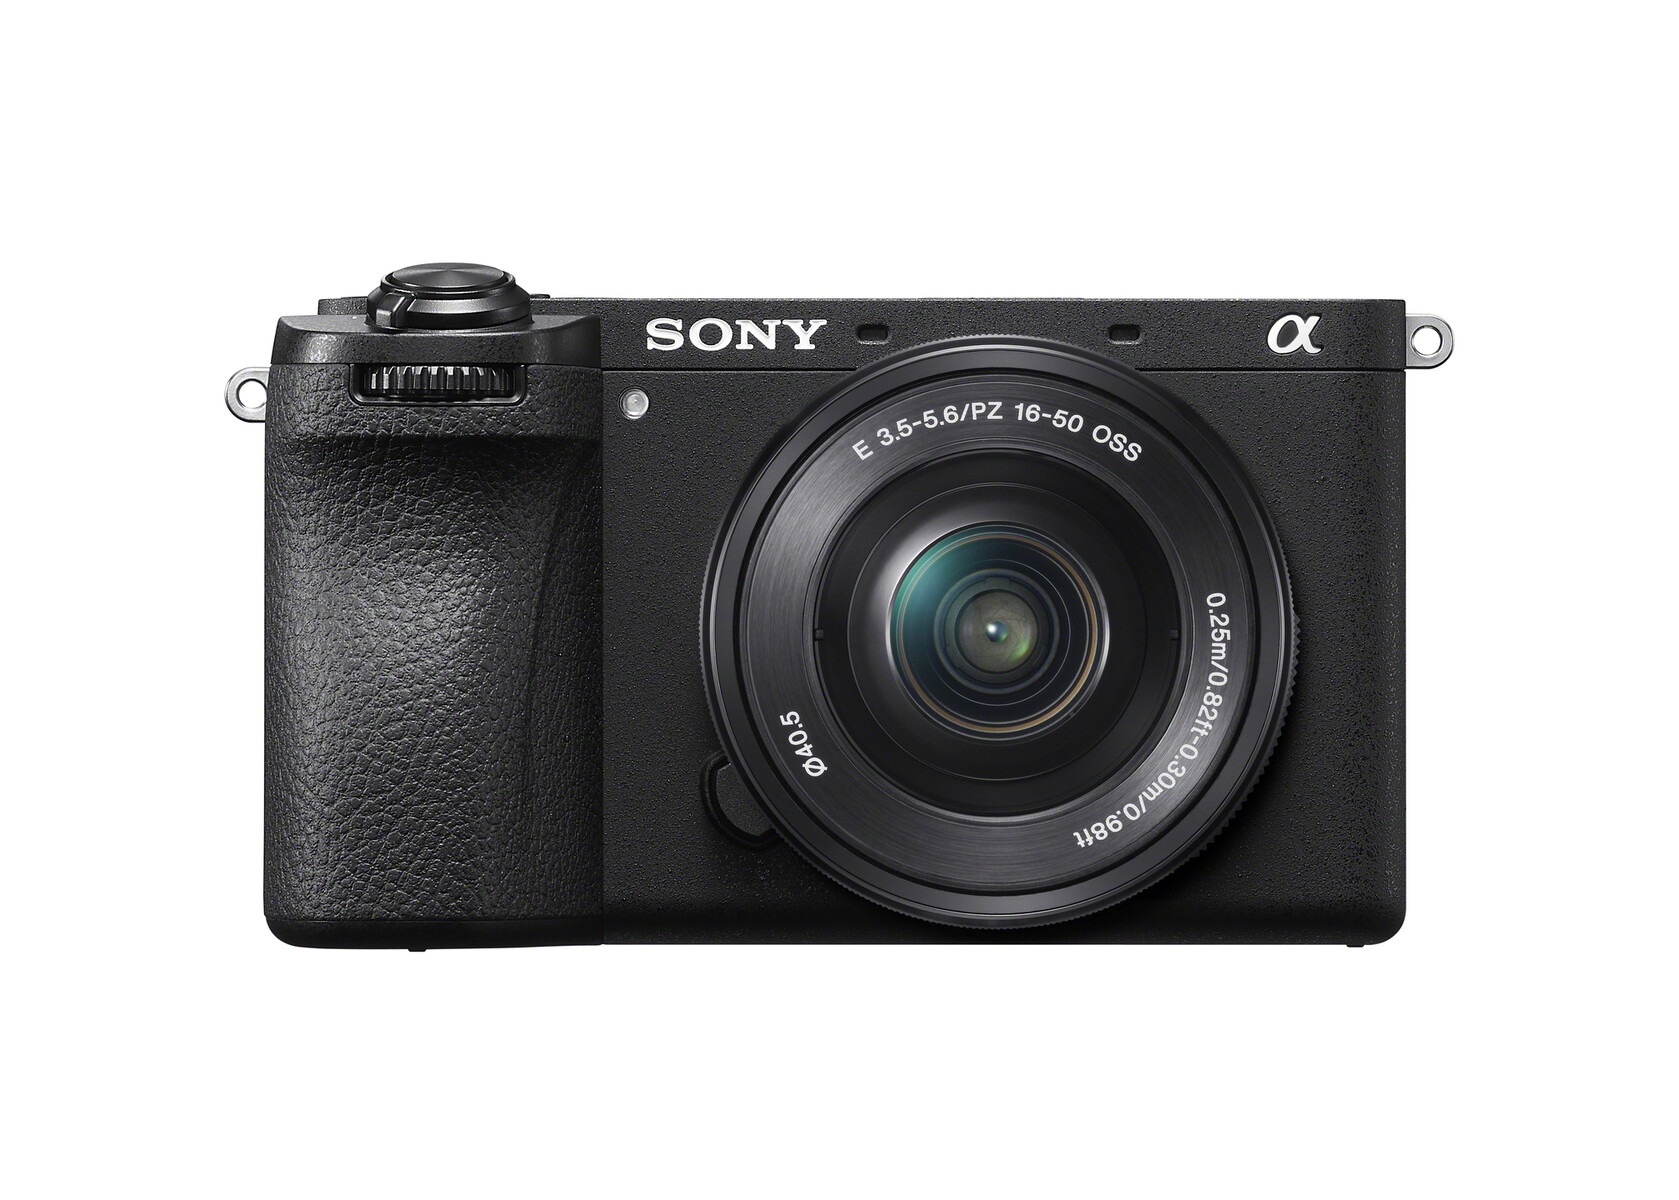 29% off Sony A6600 mirrorless APS-C camera with 4K video and 5